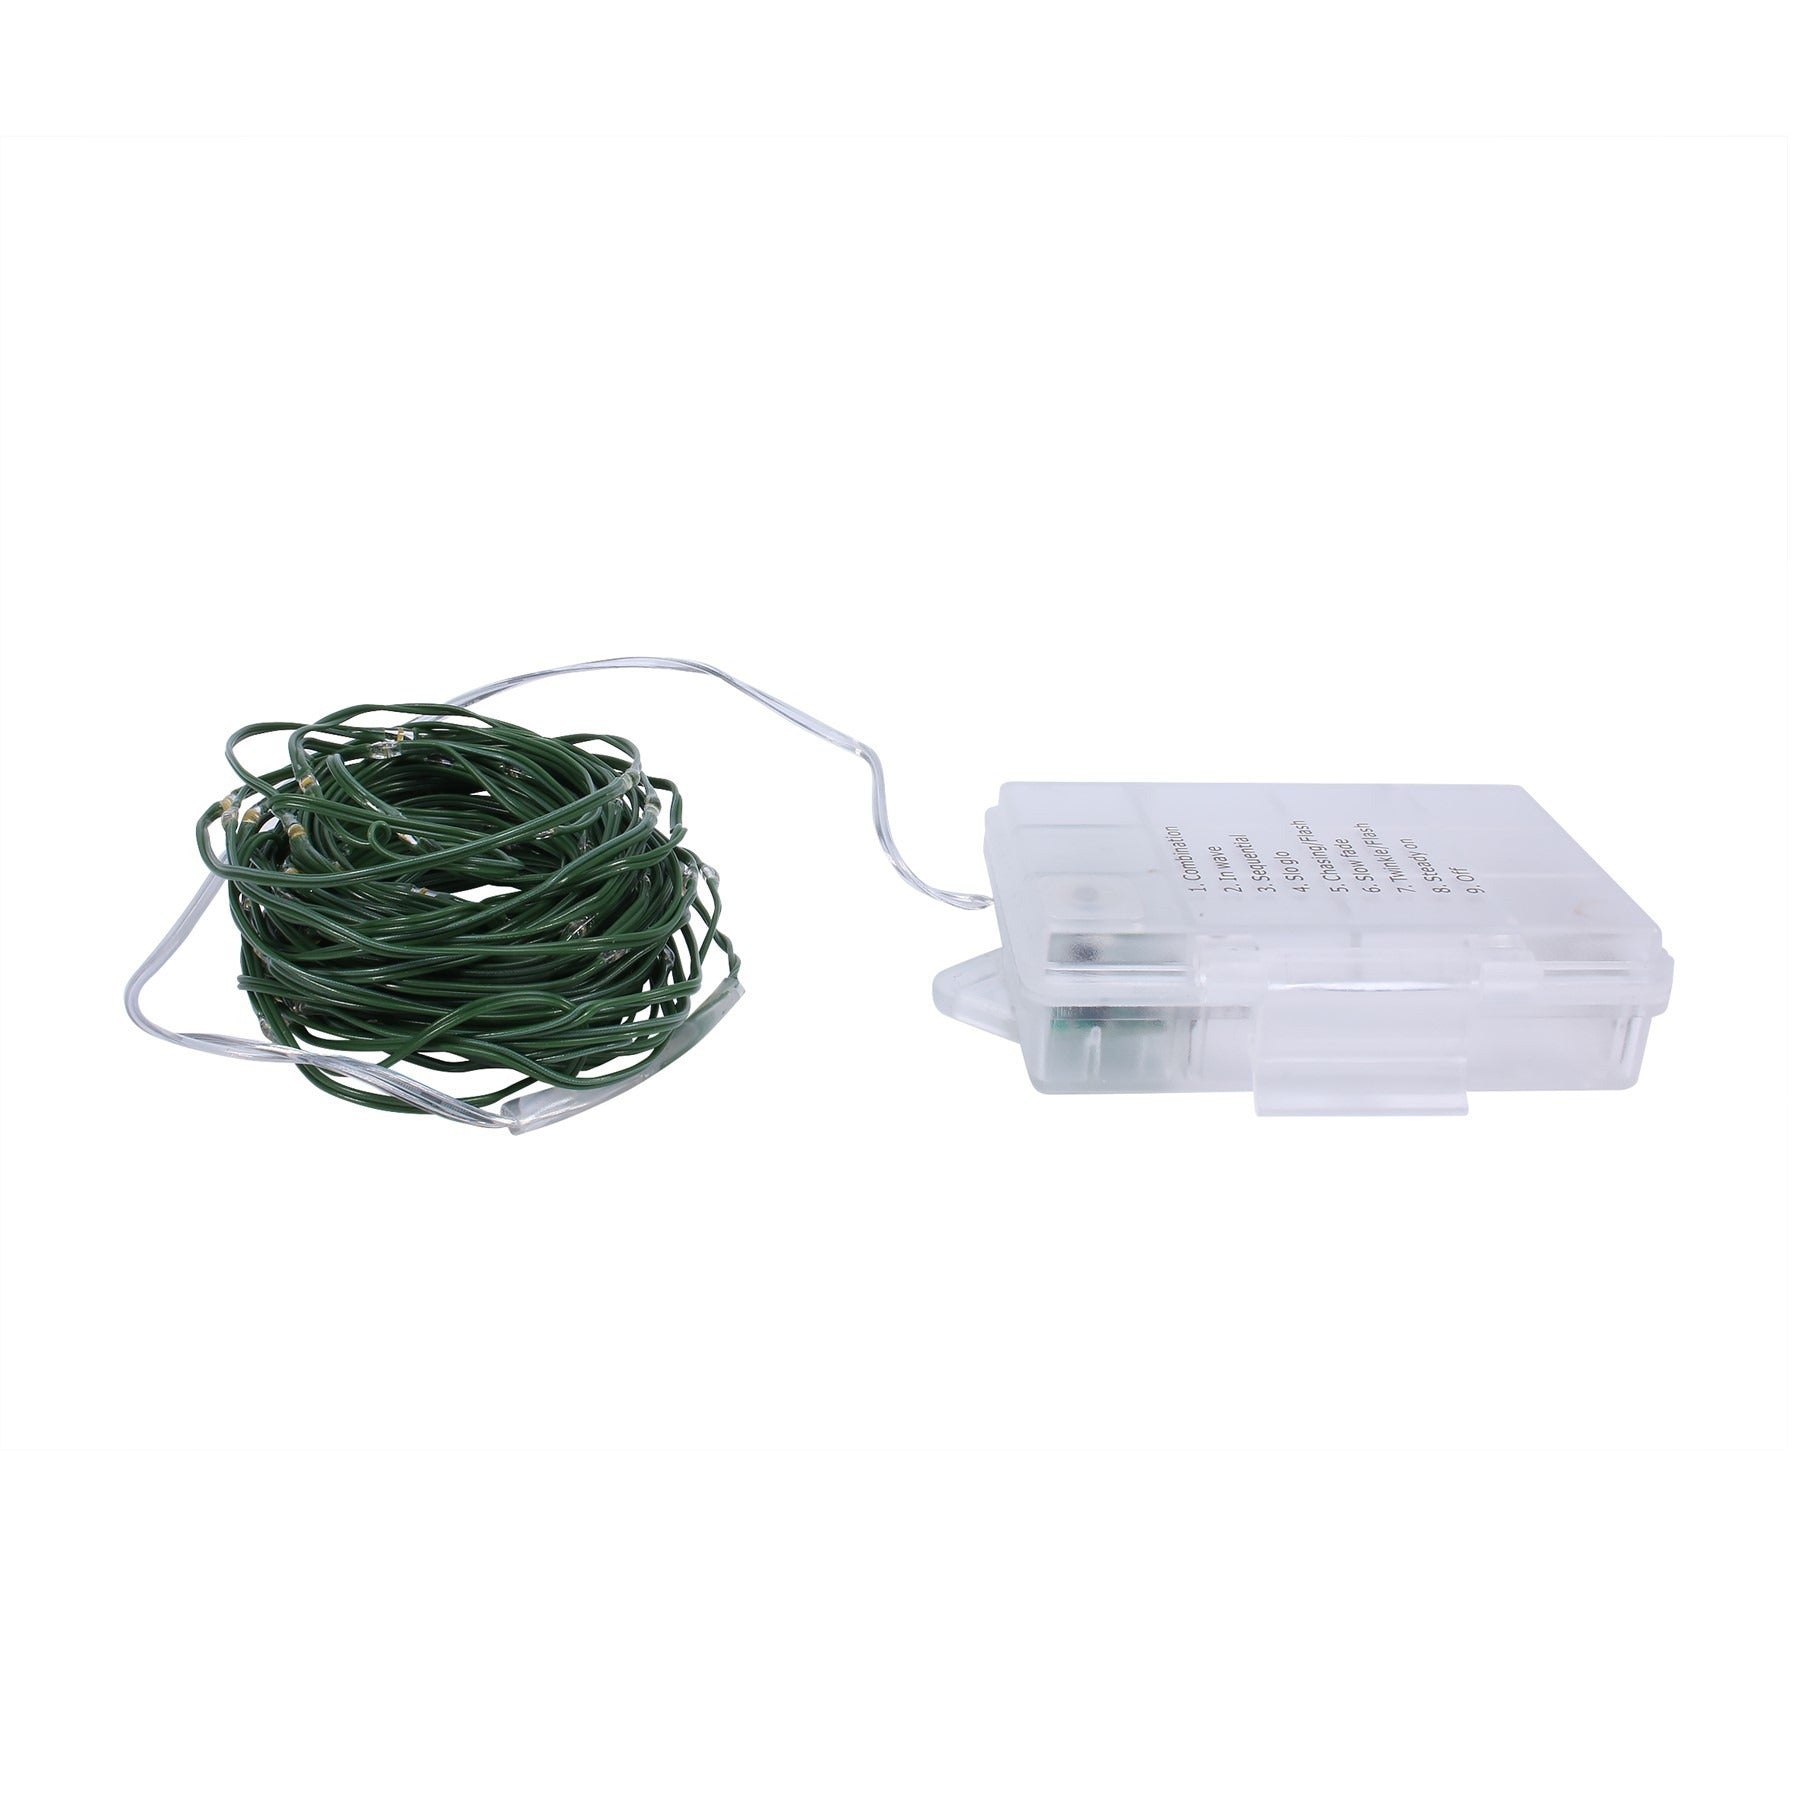 View Warm White Green Elements Outdoor Remote Wire Lights 100 Bulbs information